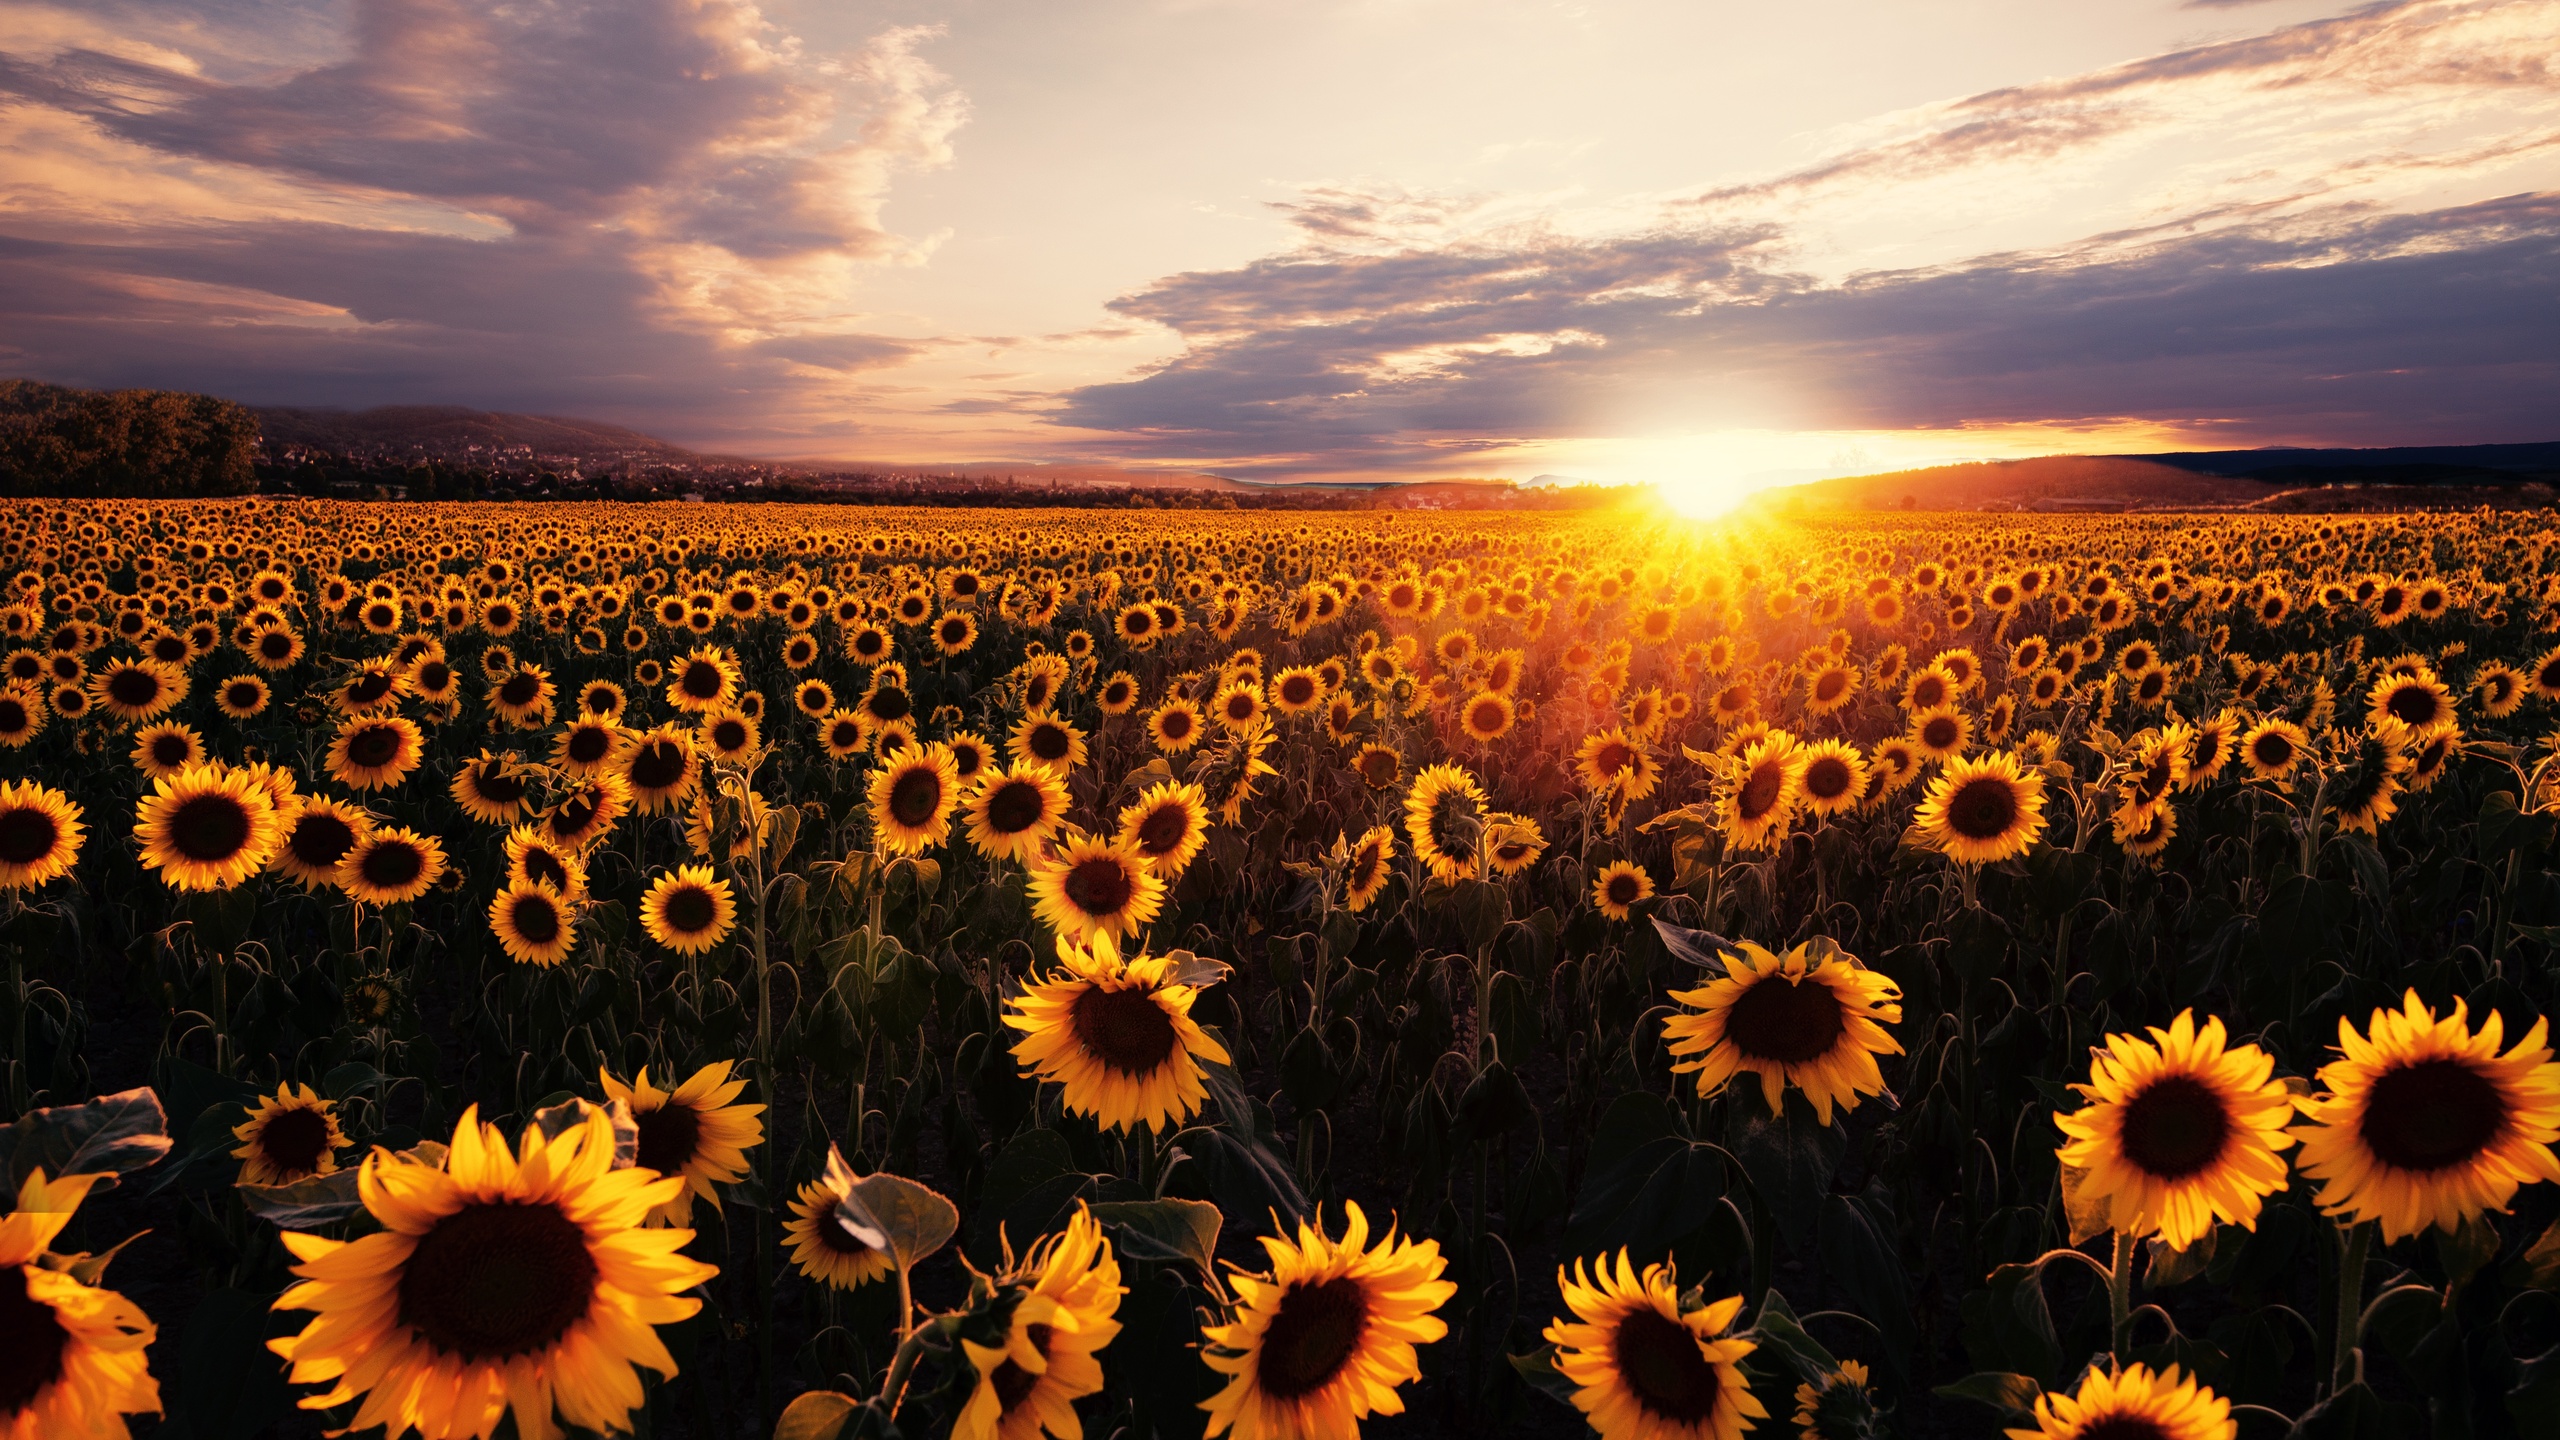 2560x1440 Sunflowers Field Sunrise 5k 1440P Resolution HD 4k Wallpapers, Images, Backgrounds